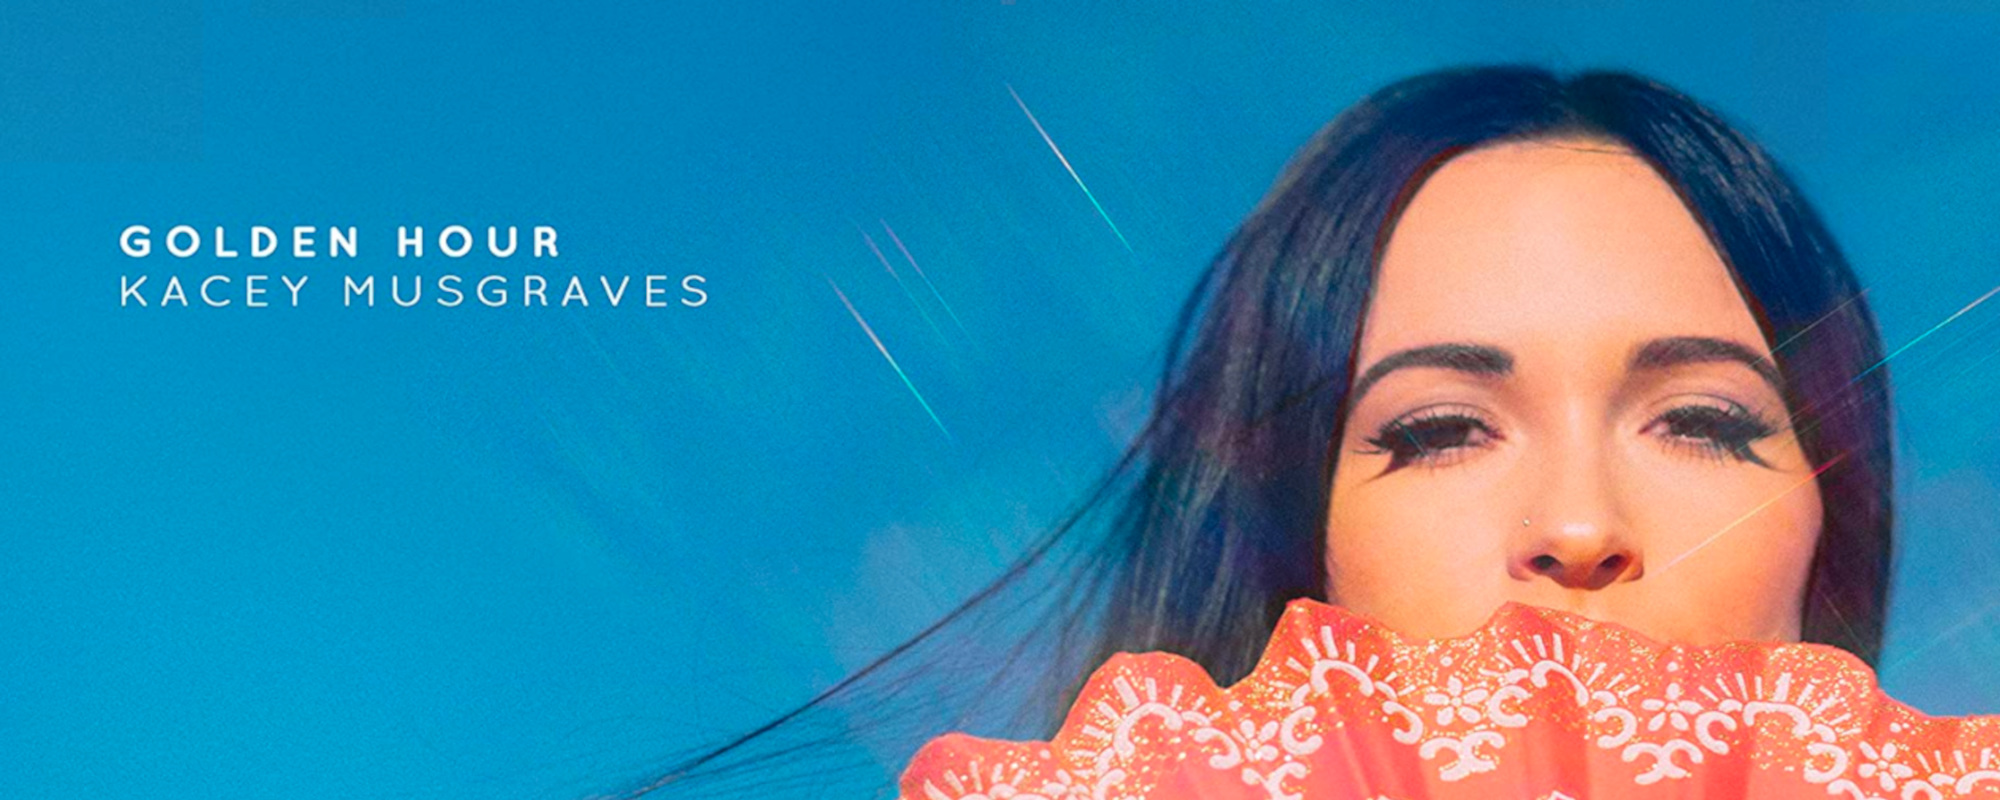 Why Kacey Musgraves’ Went Back to Her Roots for ‘Golden Hour’ Album Cover Image